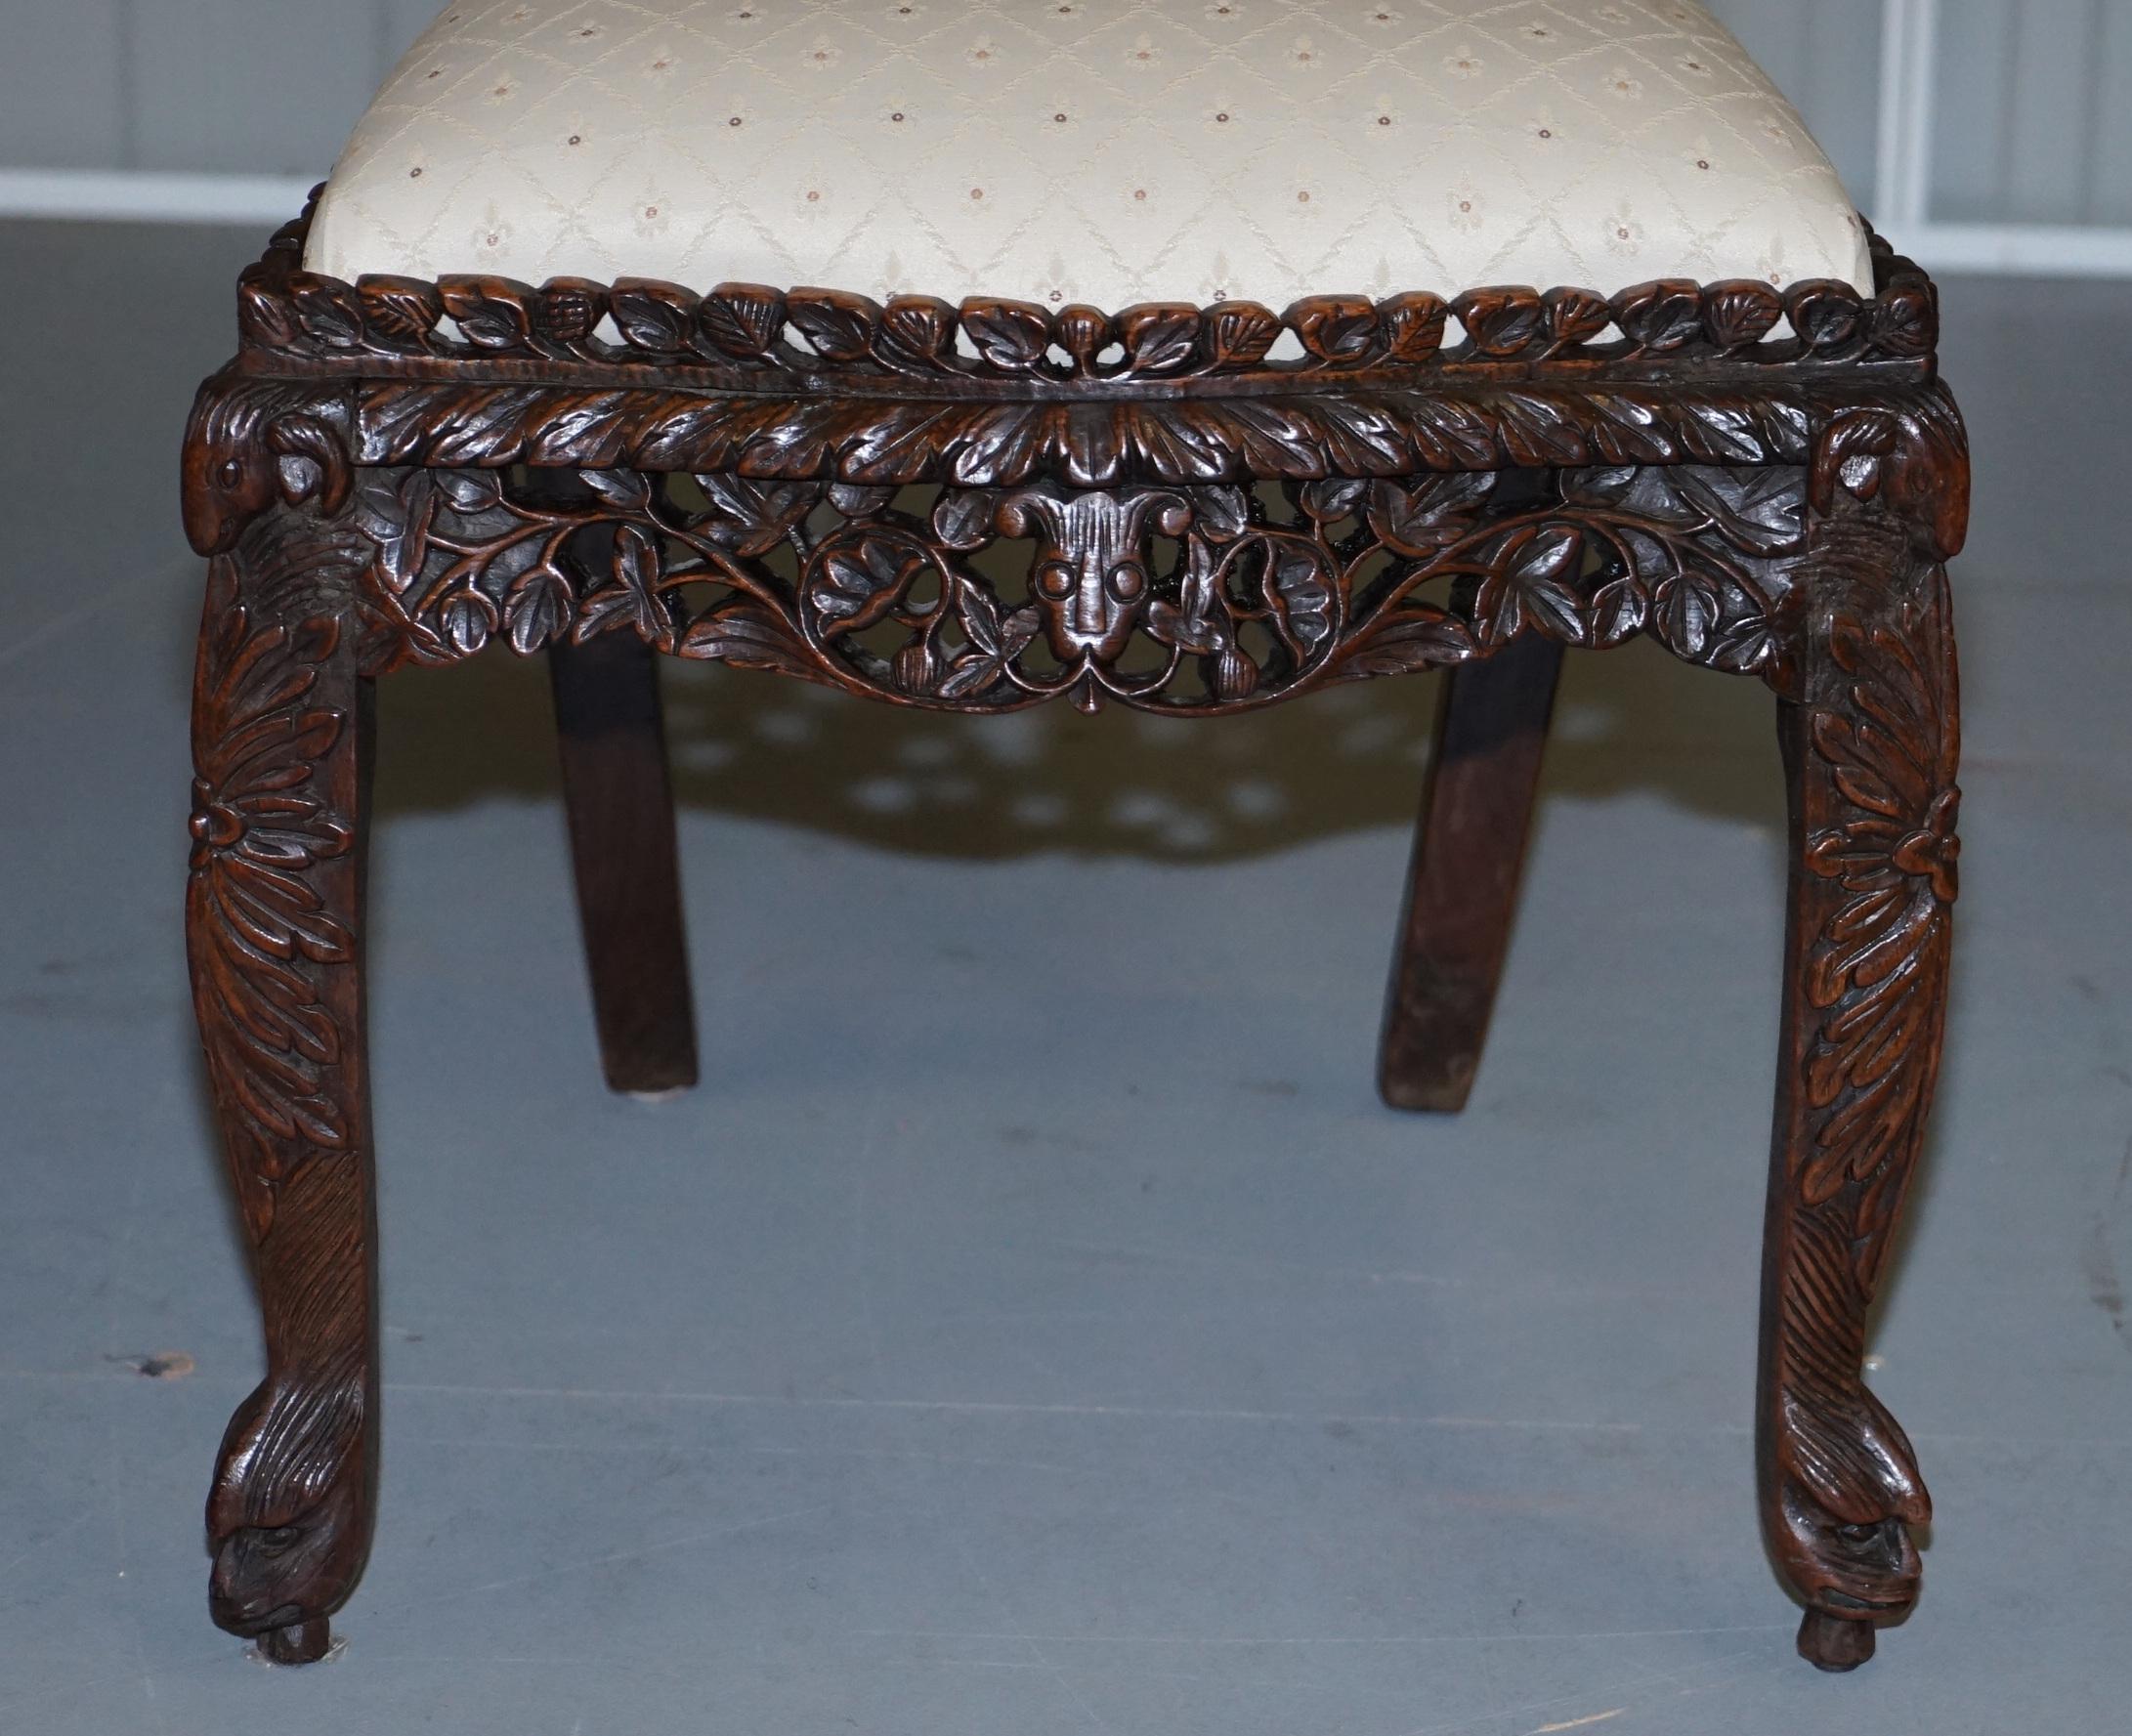 Hand-Crafted Pair of Hardwood Hand Carved Anglo Indian Burmese Chairs with Floral Detailing